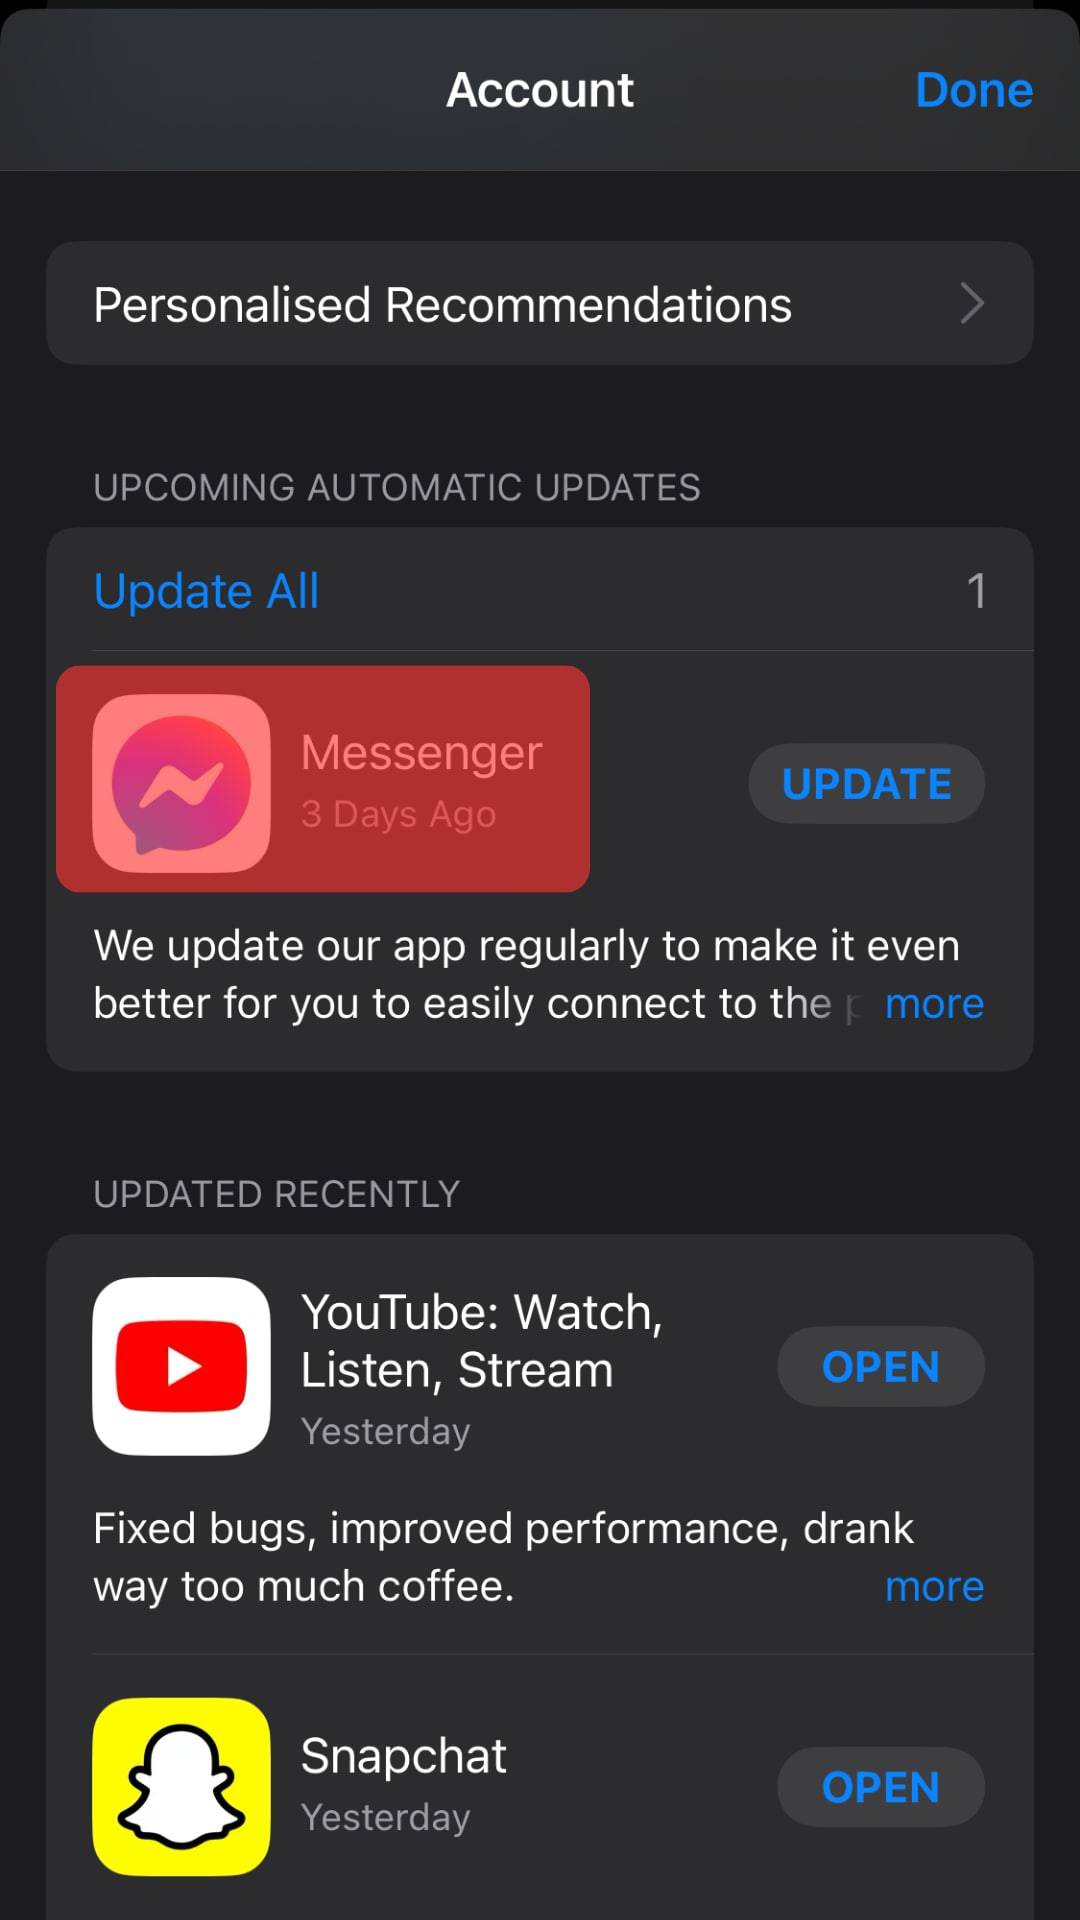 Scroll Down The Available Updates And Find Messenger.